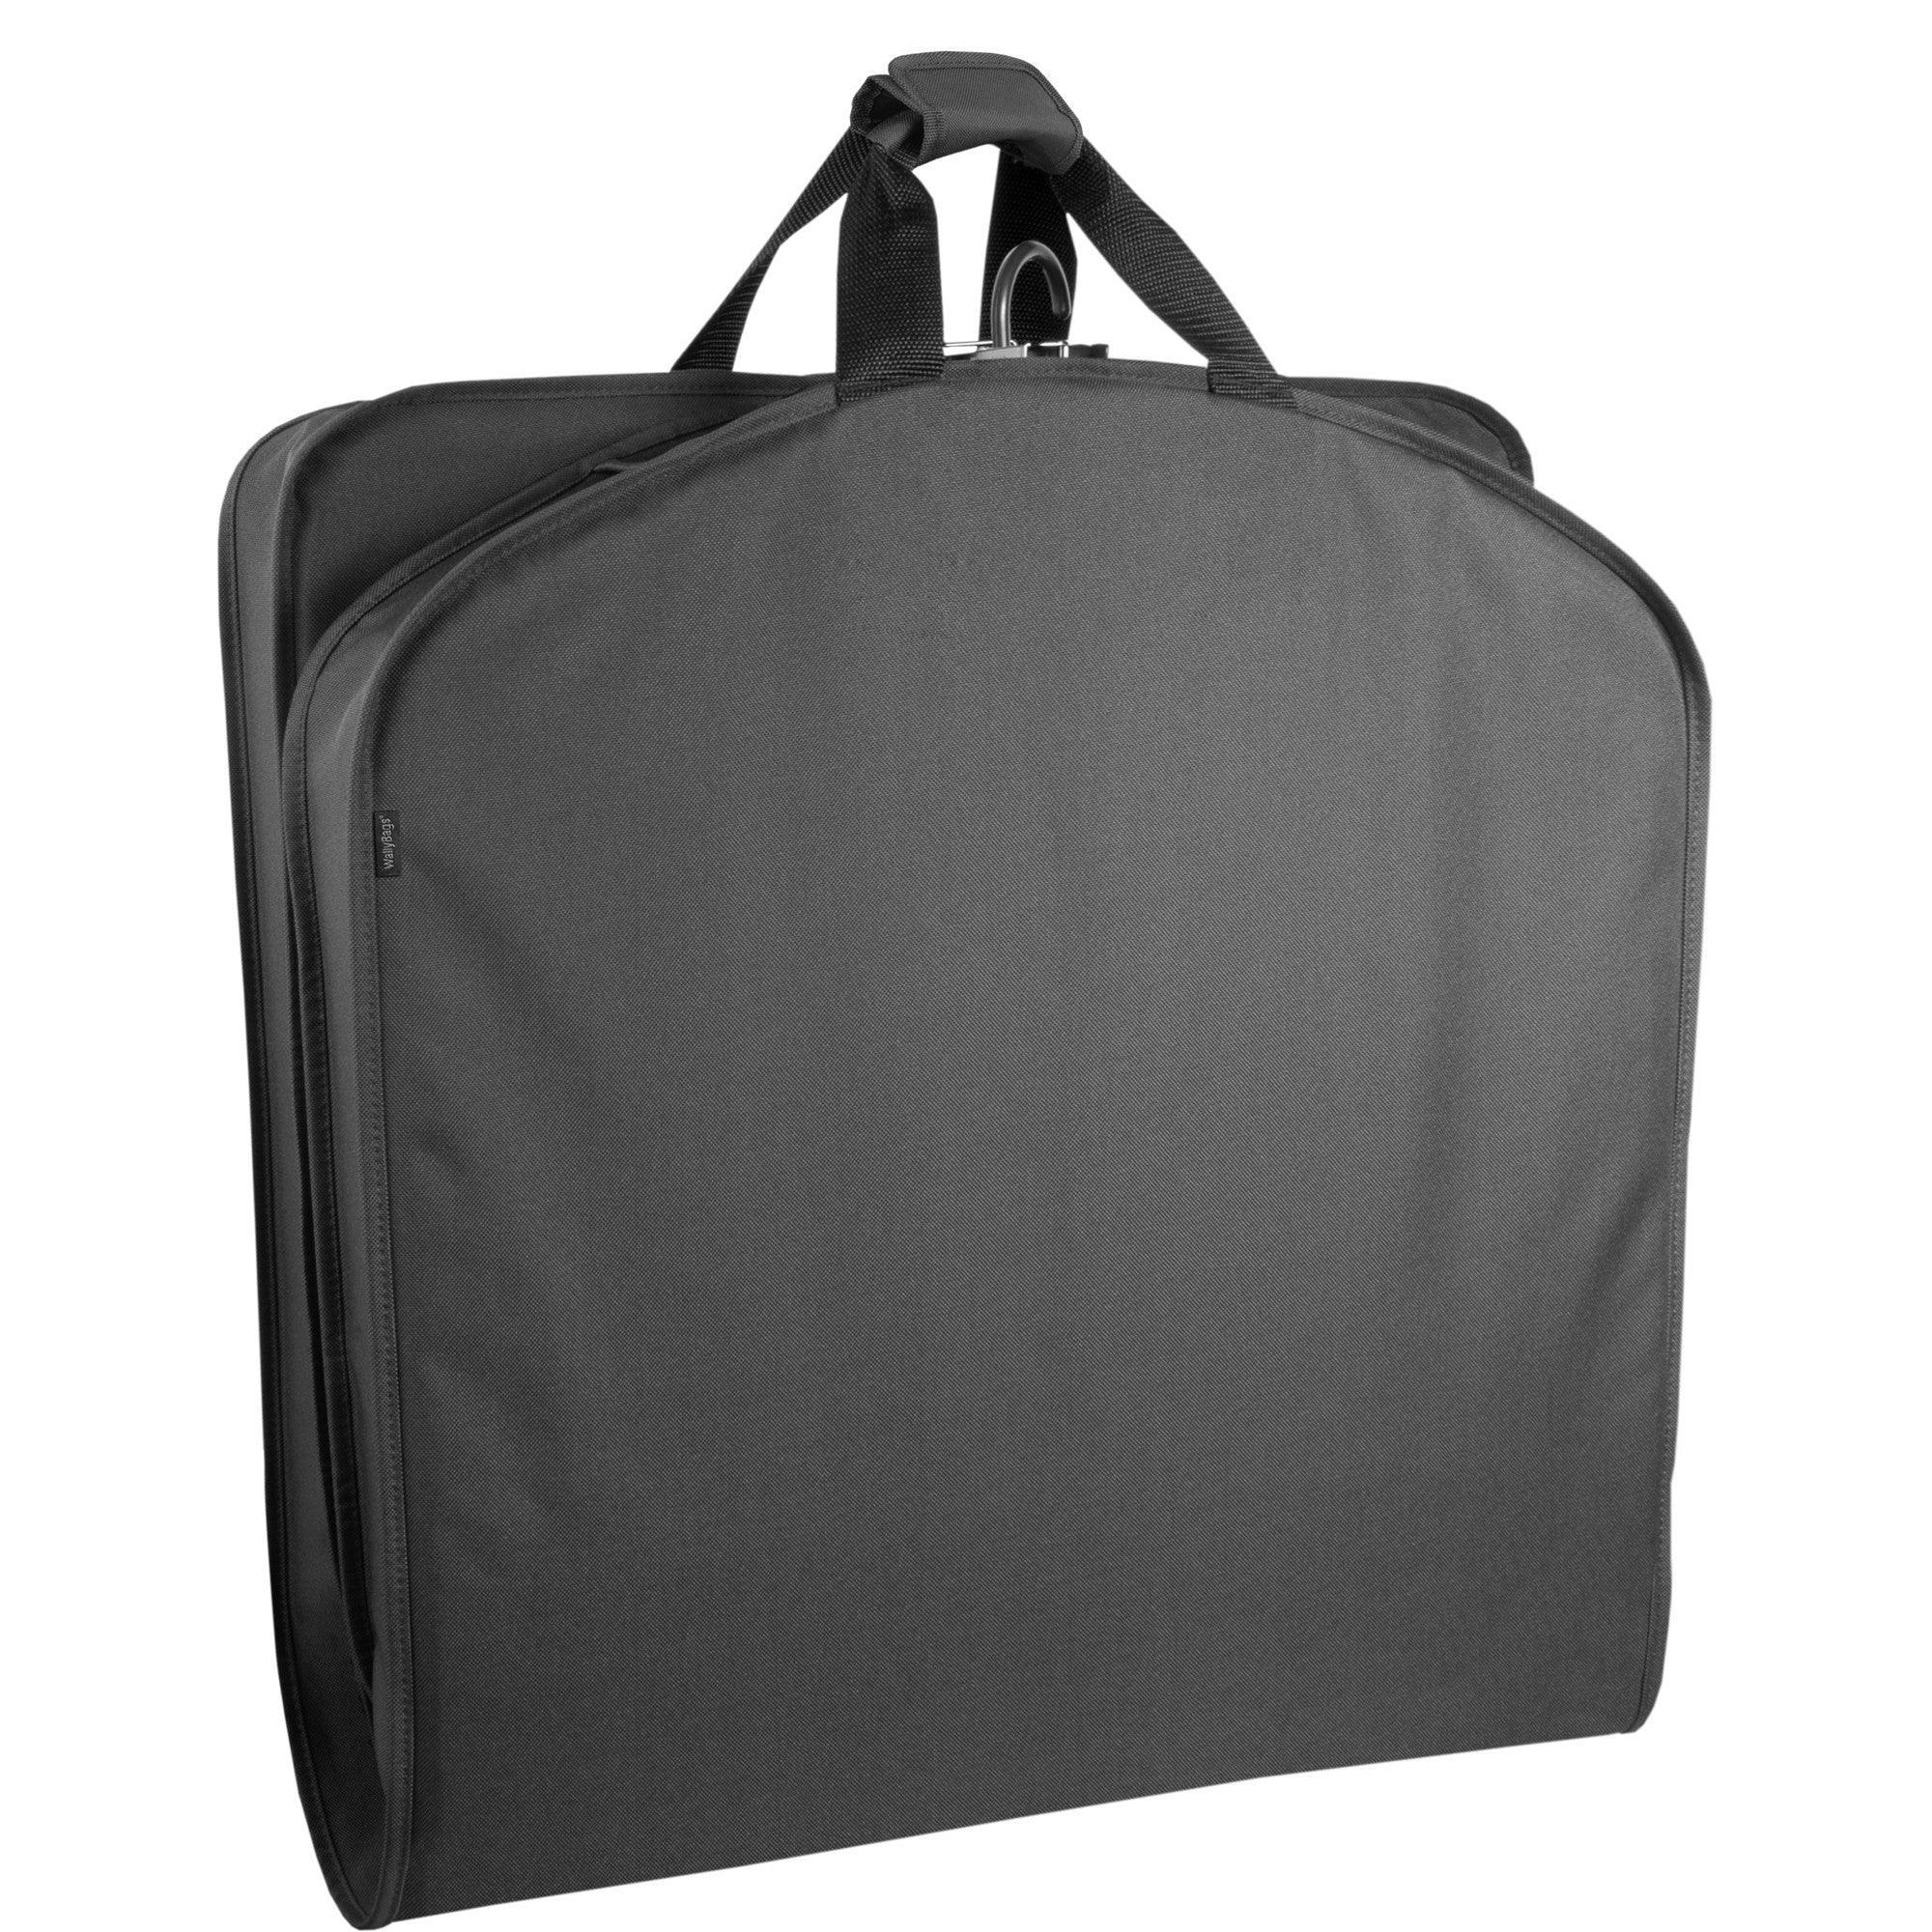 Deluxe Travel Garment Bag 40" - Voyage Luggage